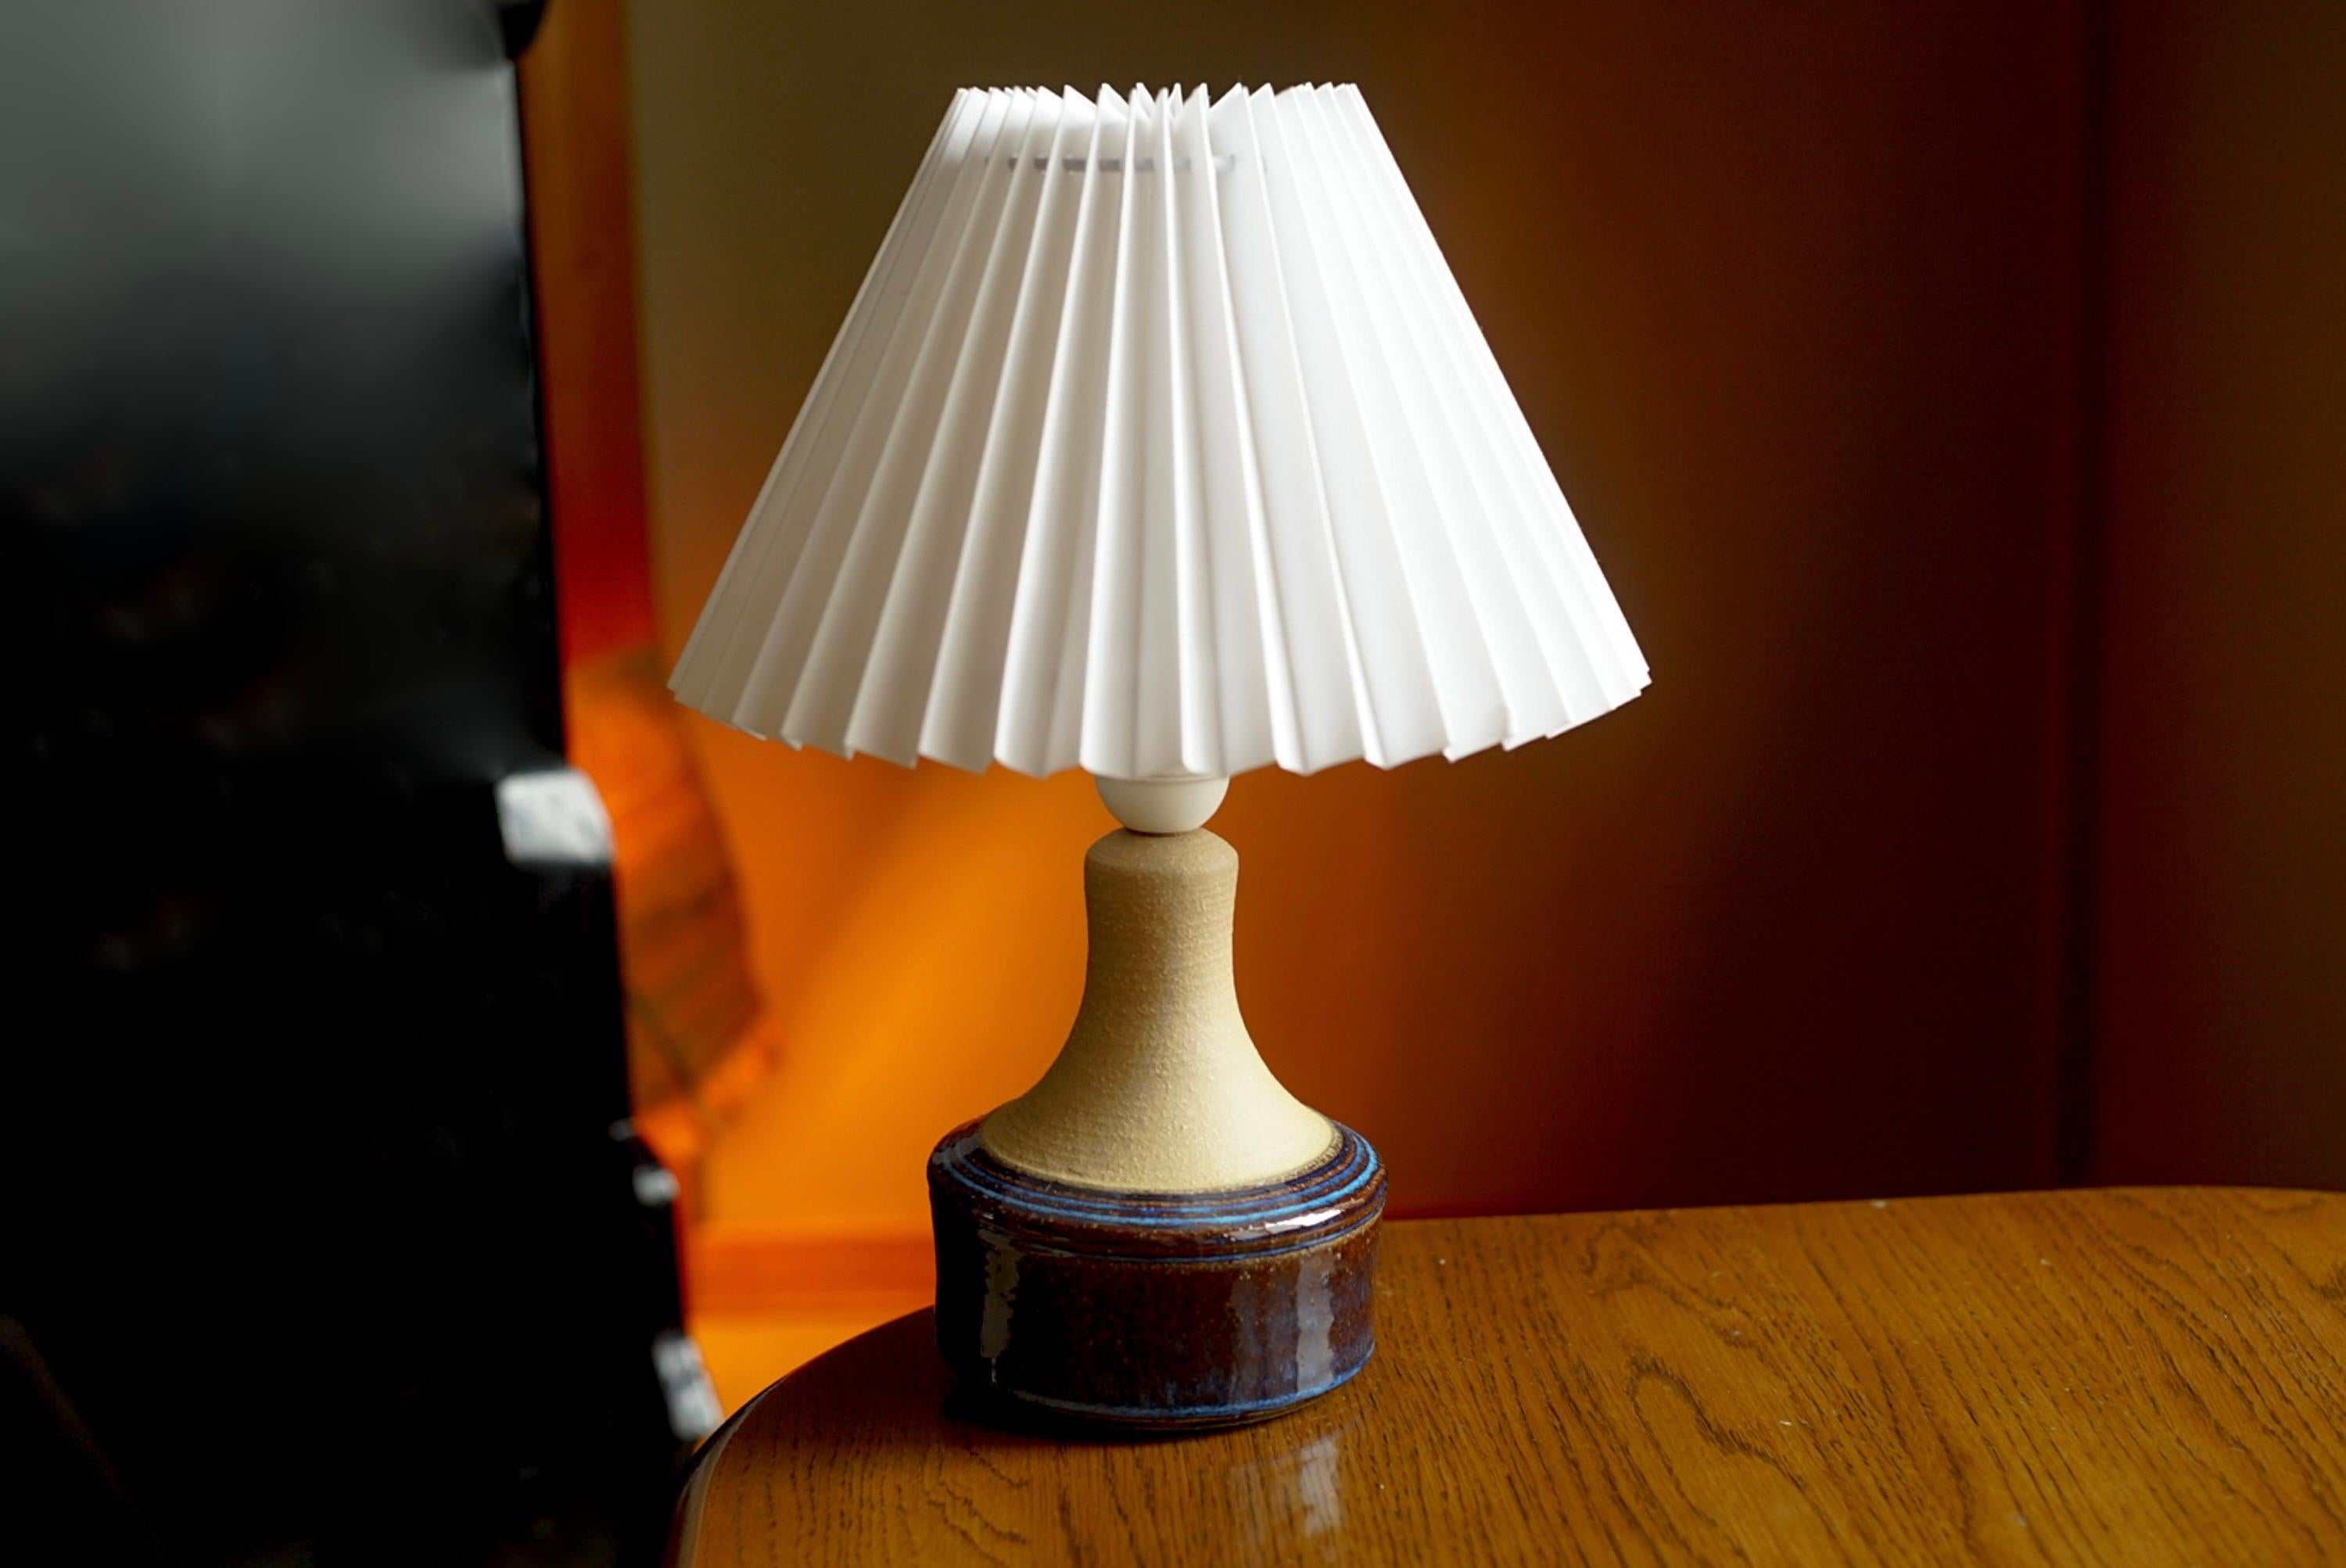 A table lamp produced by Søholm Keramik, located on the island of Bornholm in Denmark. Features a highly artistic glazed and incised decor.

Sold without lampshade. Stated dimensions exclude the lampshade. Height includes socket.